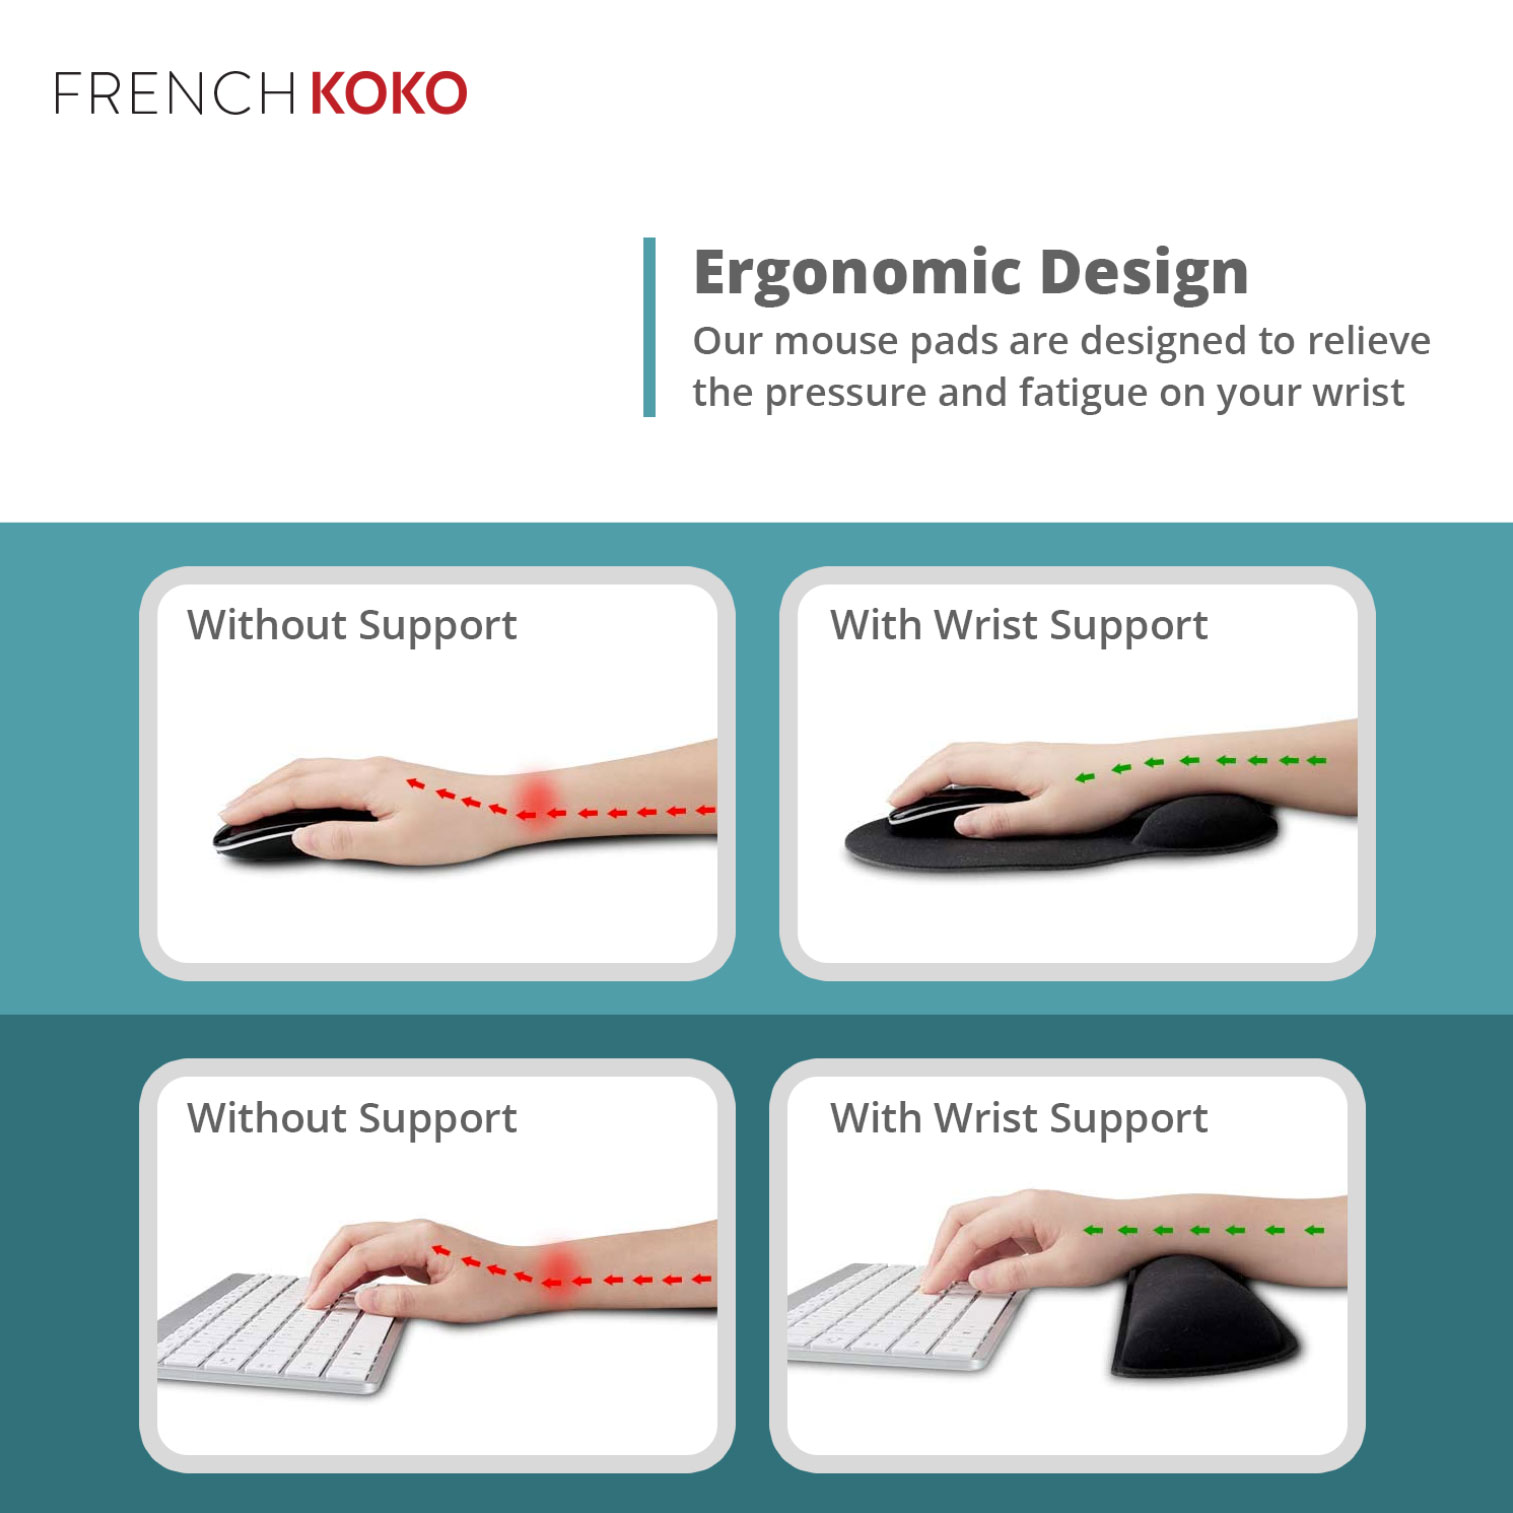 French Koko Mouse Pad & Keyboard Pad with Wrist Support, Non Slip Comfortable Pretty Mousepad with Gel Support Desktop Laptop Mouse Pad Rest Memory Foam for Easy Mouse Movement Cute Electronics - image 3 of 5